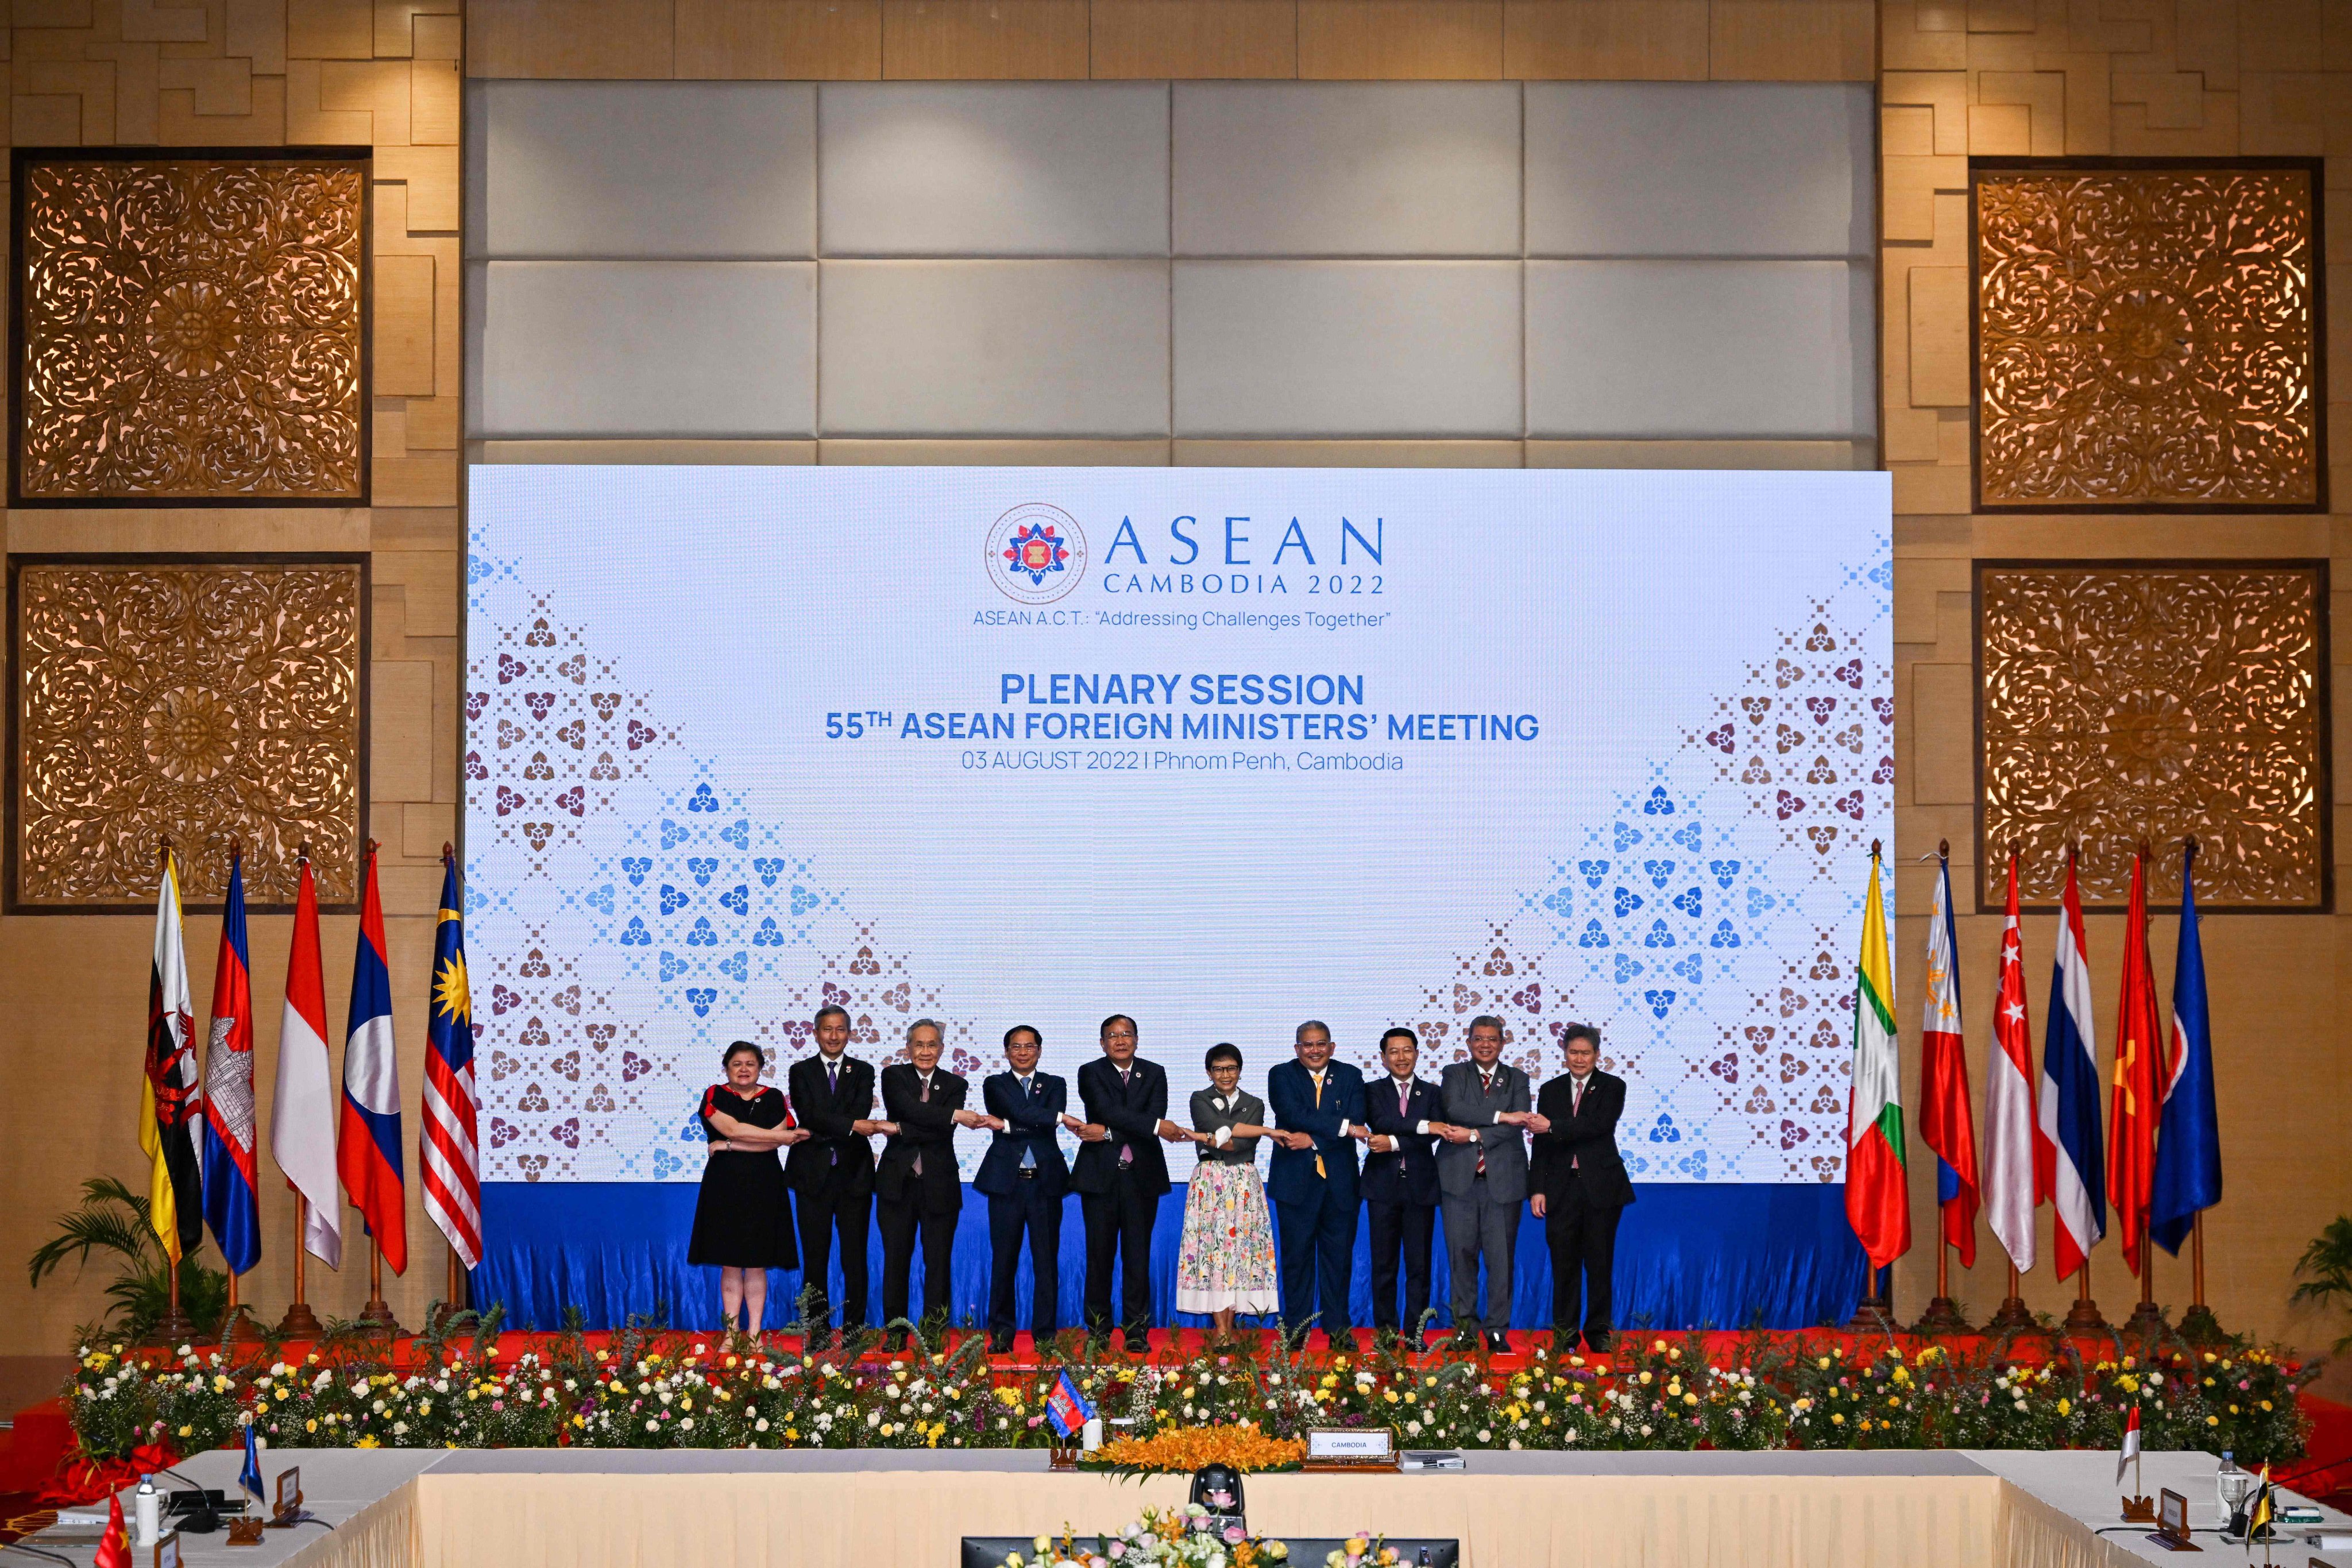 Southeast Asian foreign ministers during a plenary session at the 55th Asean Foreign Ministers Meeting in Phnom Penh in August 2022. Photo: AFP